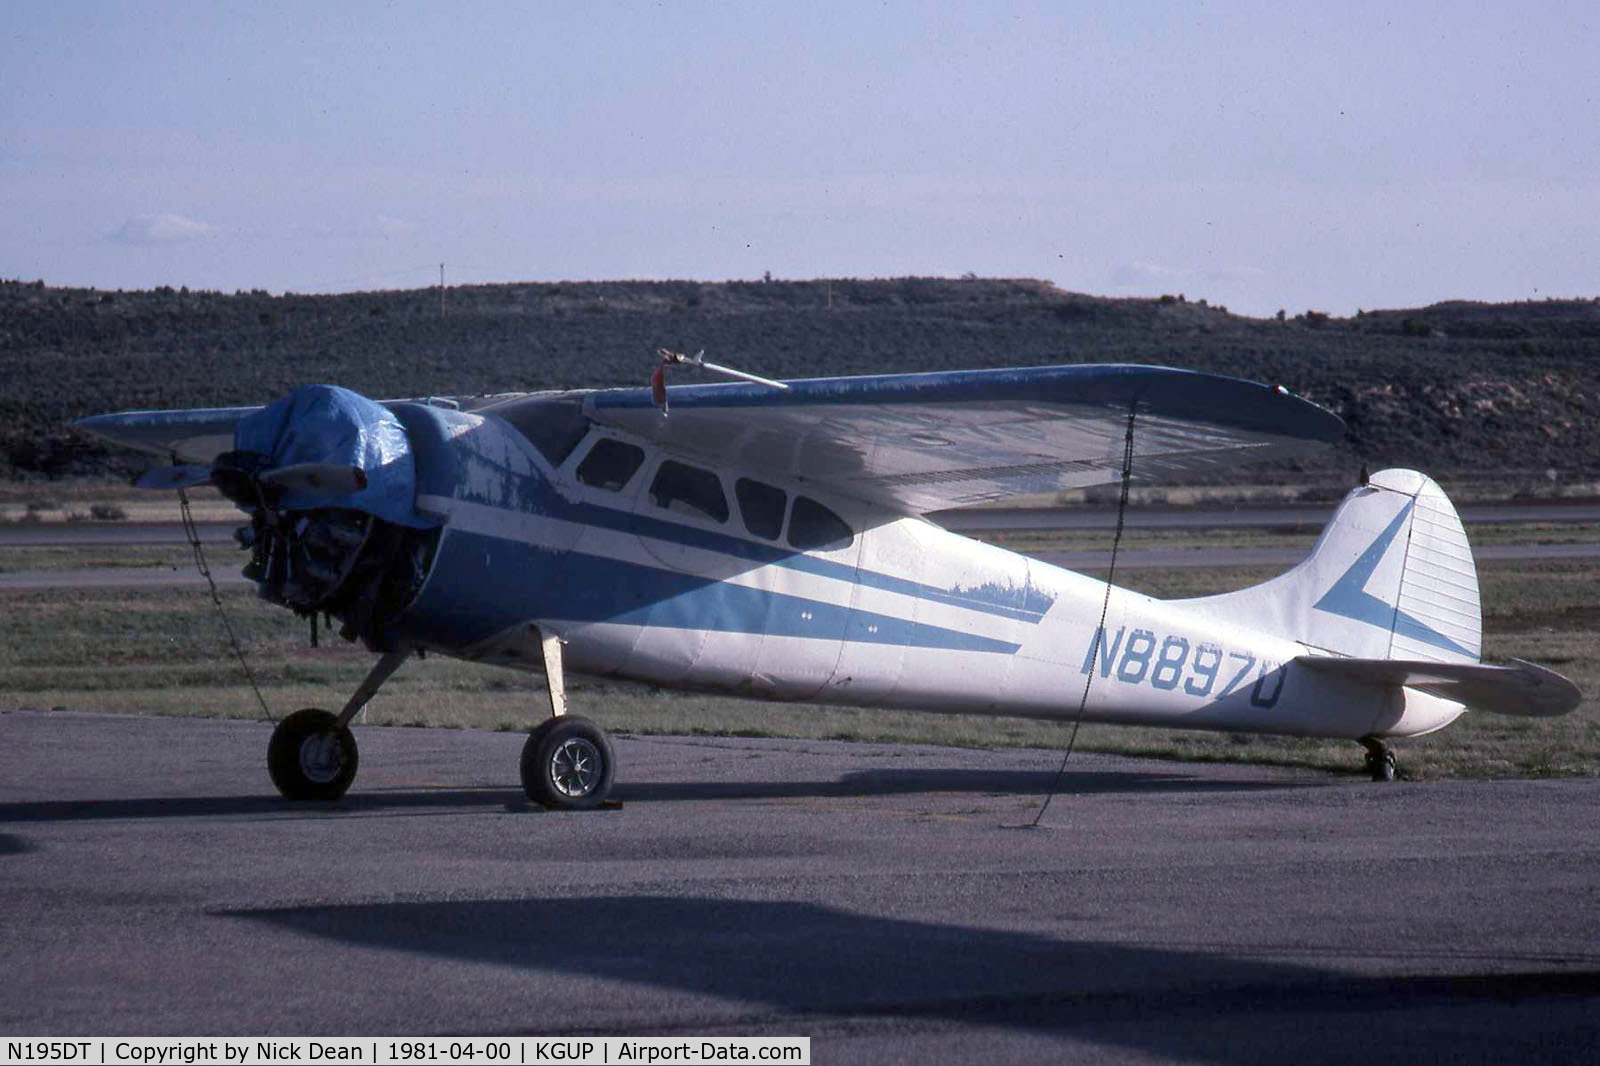 N195DT, 1948 Cessna 195 C/N 7287, Shot in sorry condition as N88970 but now alive and wel and registered as listed